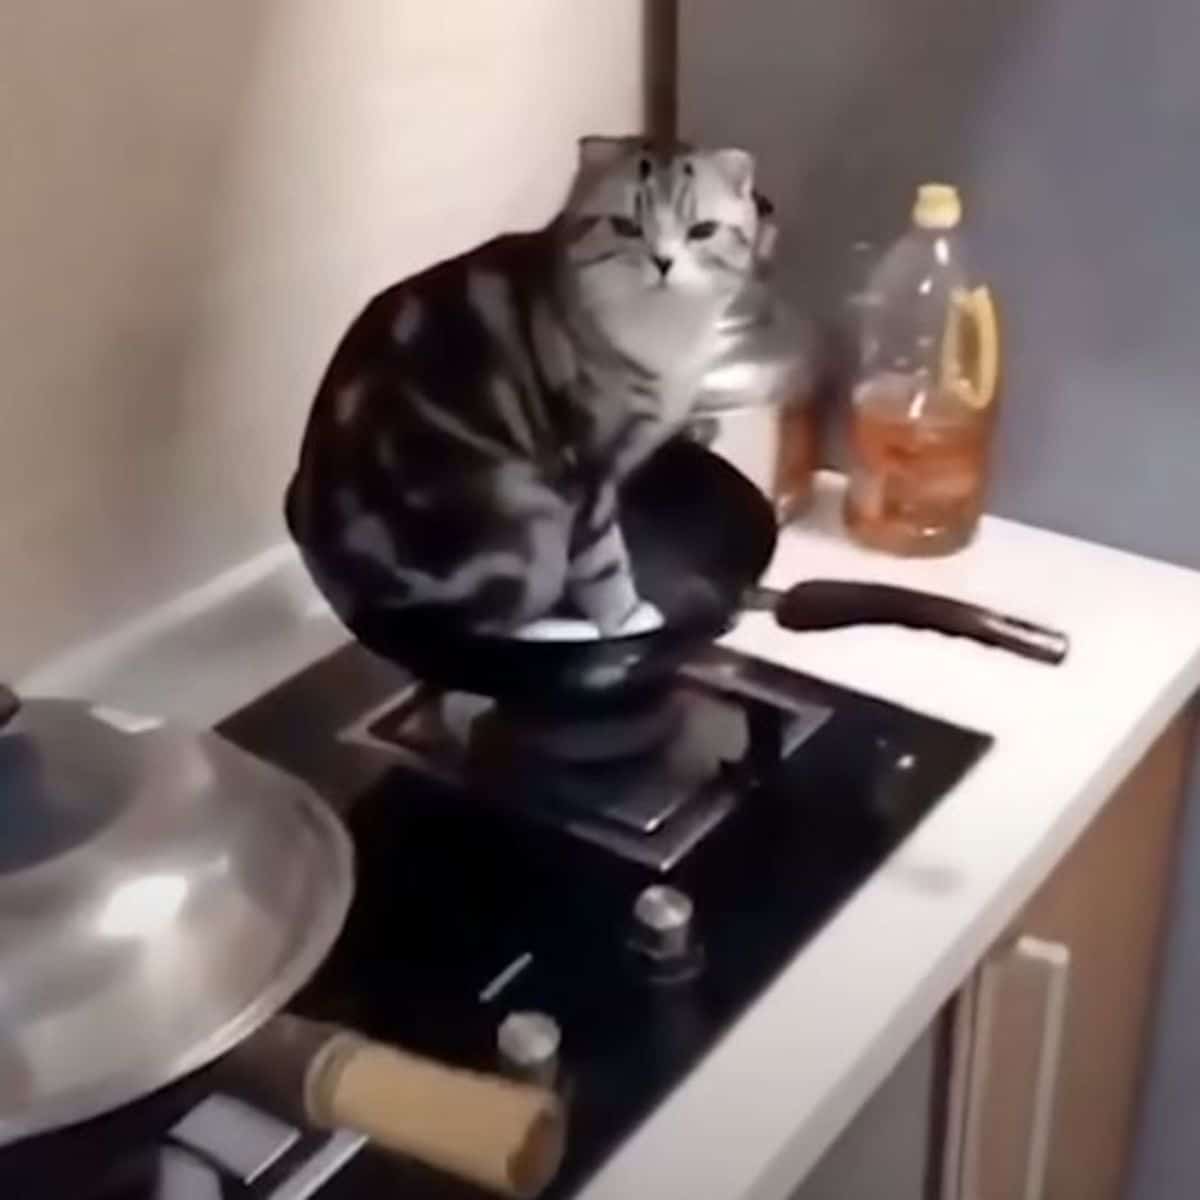 white and grey tabby sitting in pan on an unlit stove